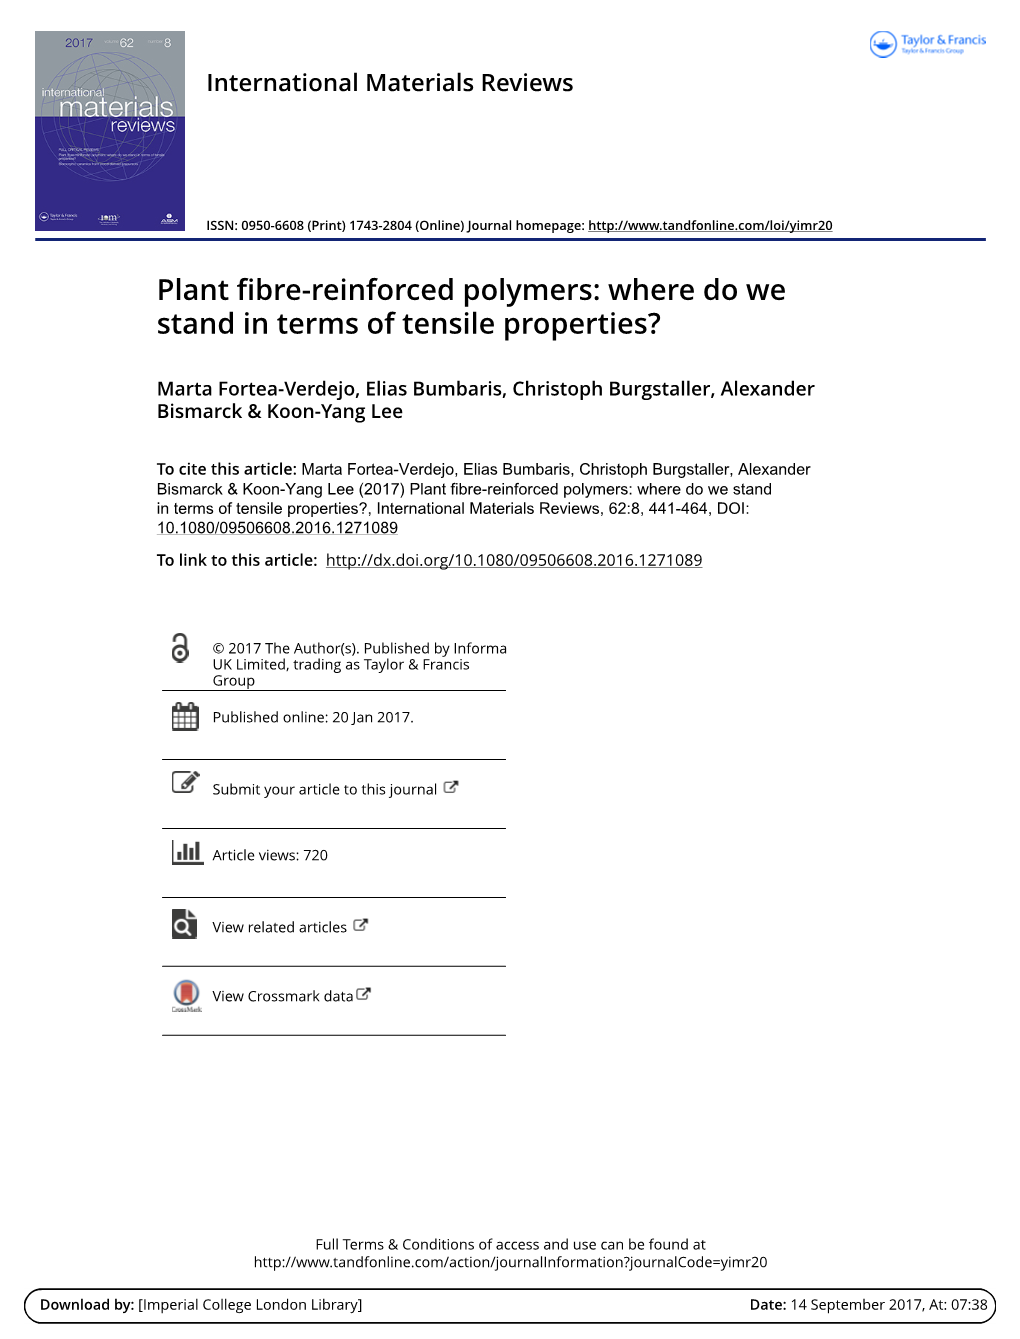 Plant Fibre-Reinforced Polymers: Where Do We Stand in Terms of Tensile Properties?